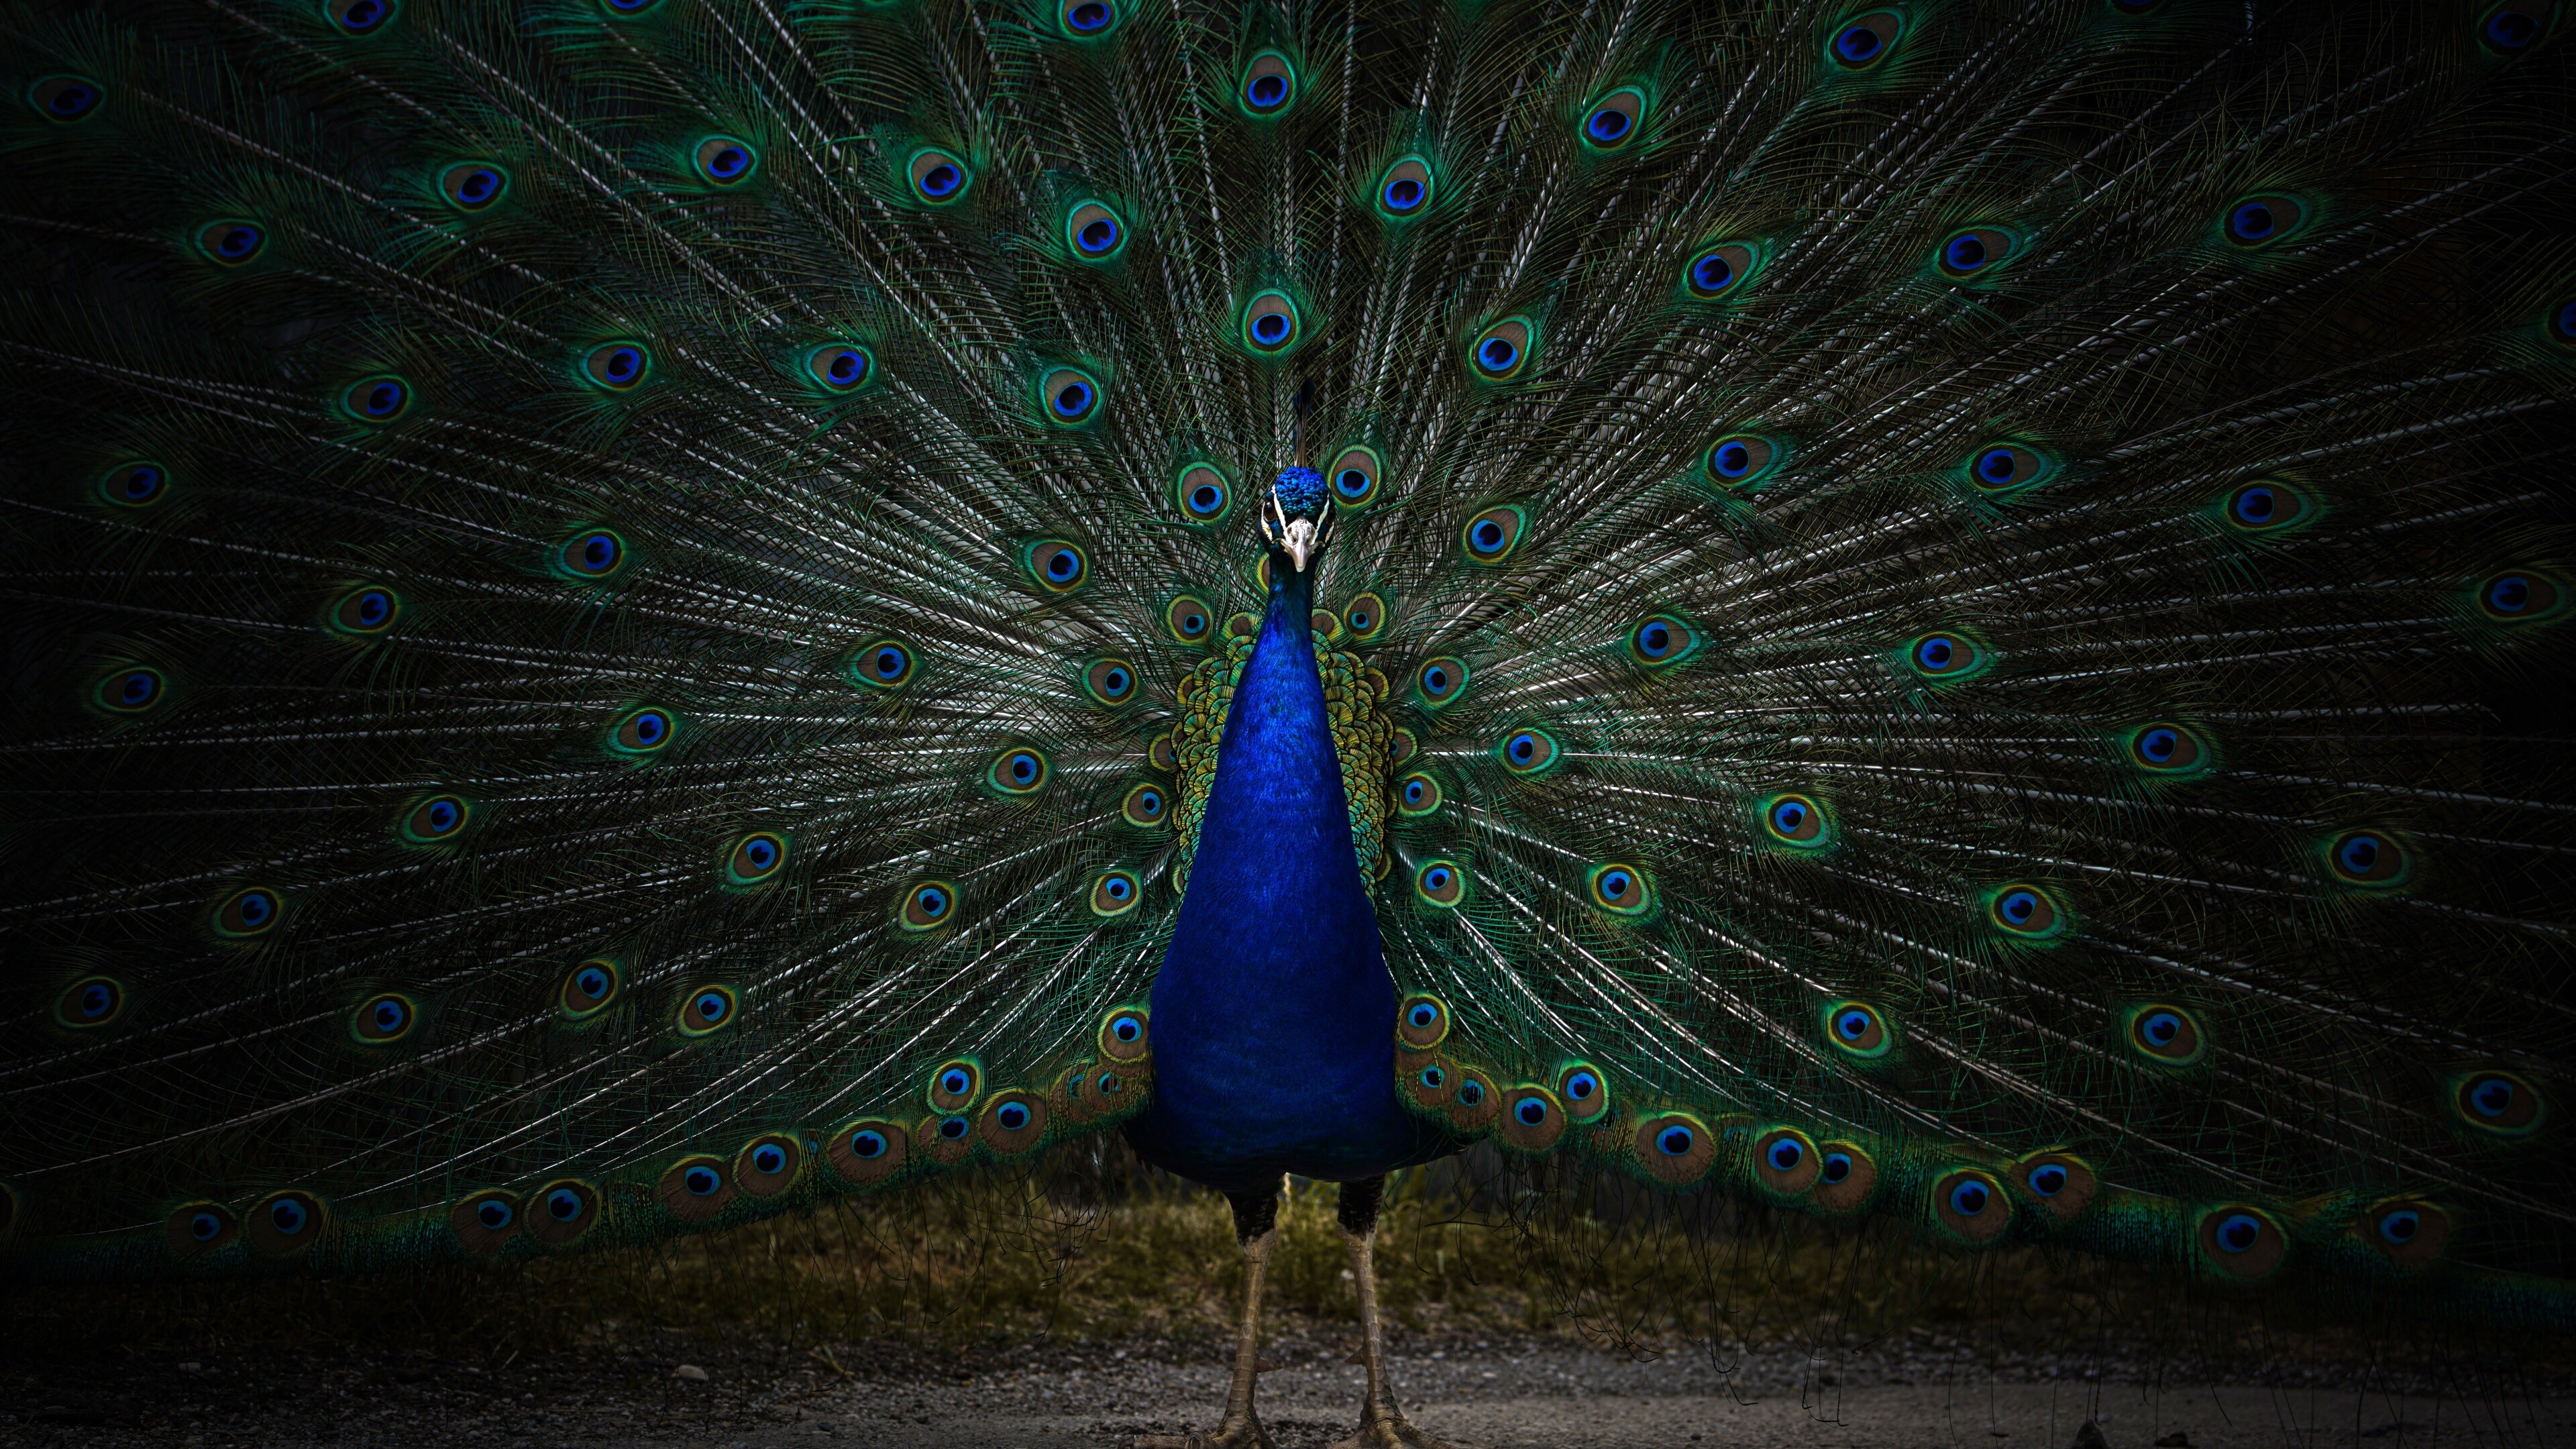 Peacock: Peafowl, Zoo, Animals, Indian birds, Feathers. 3840x2160 4K Wallpaper.